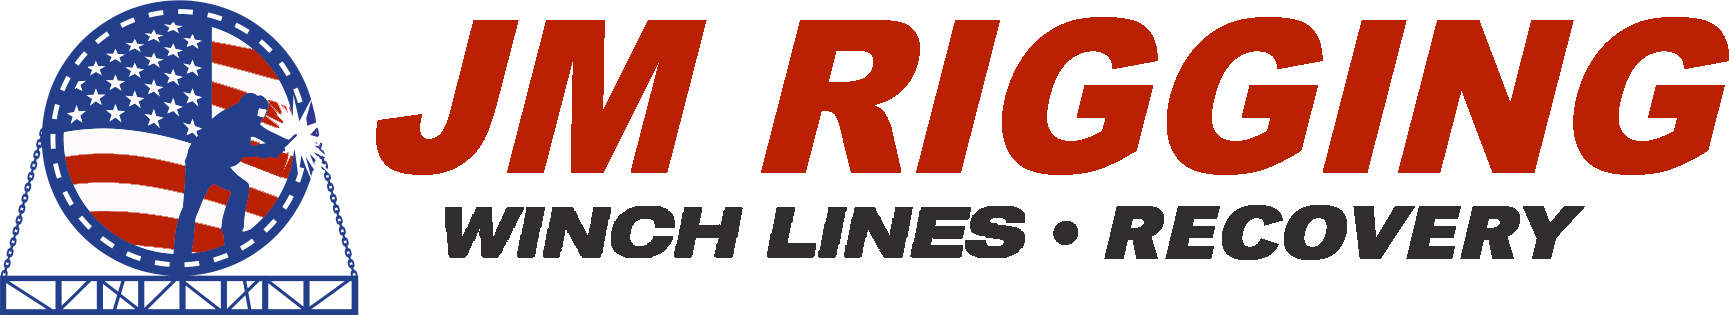 JM Rigging - RECOVERY & WINCHLINES  - BLK & RED (PERFECT).jpg